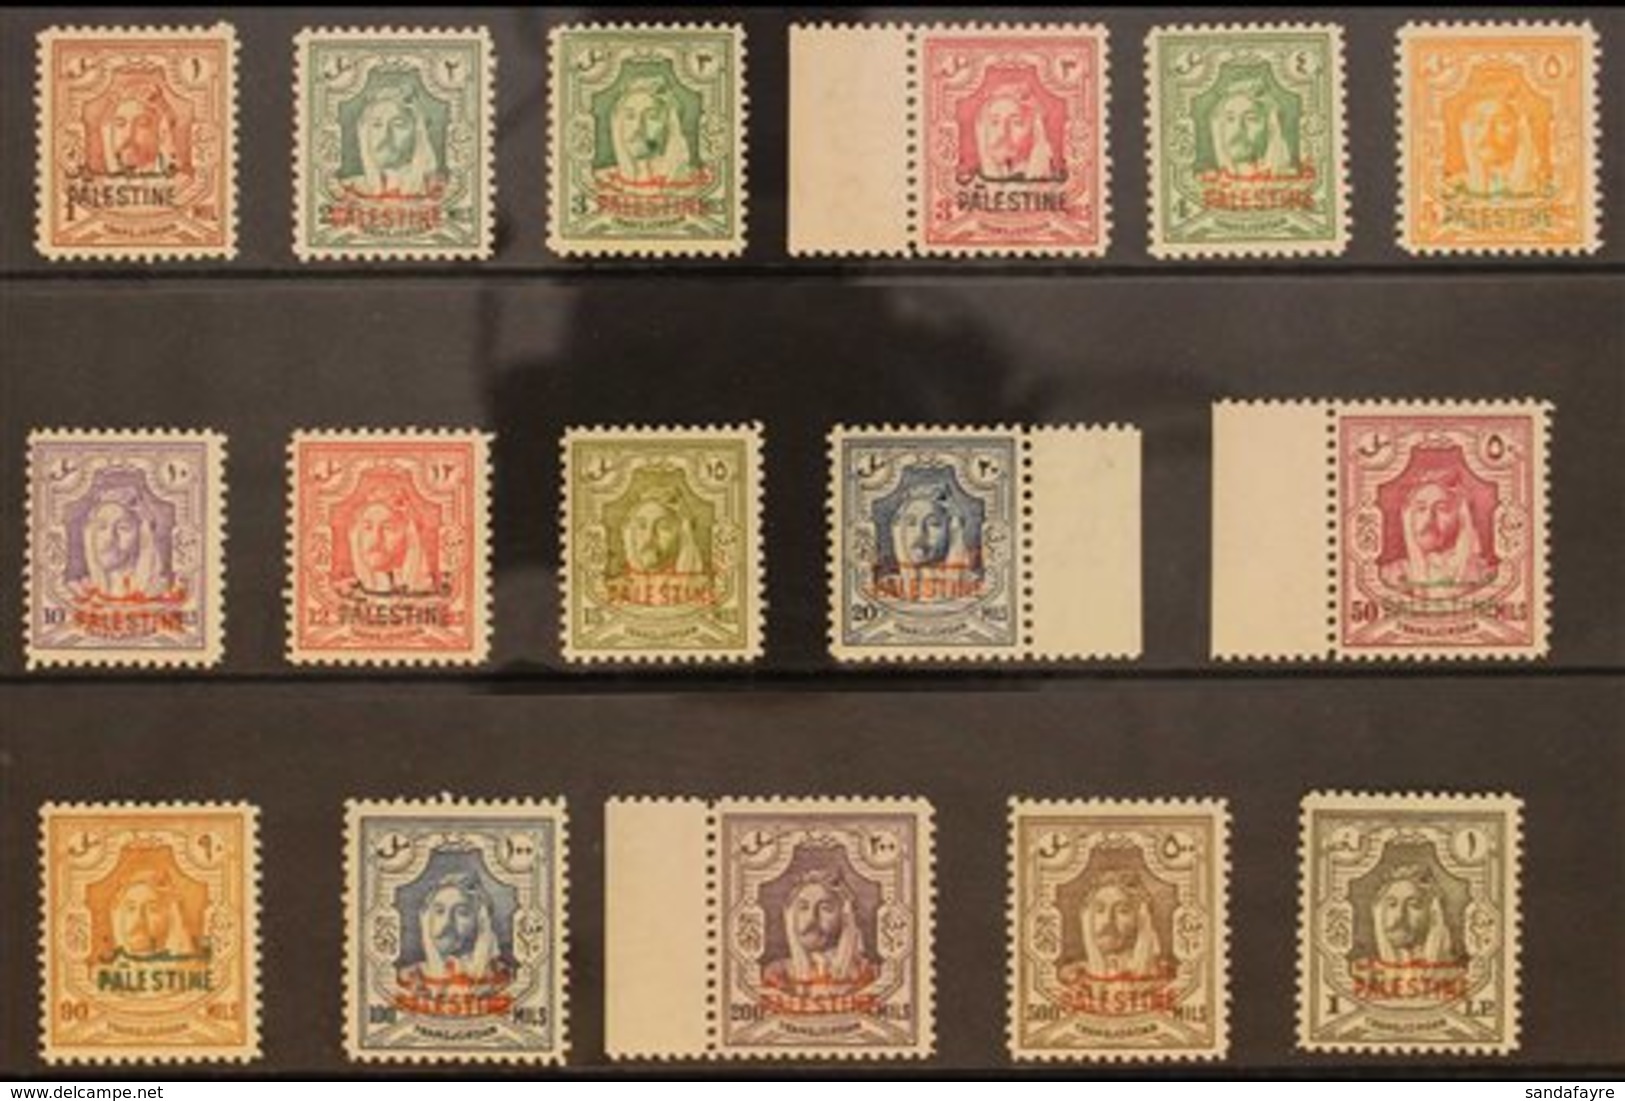 OCCUPATION OF PALESTINE  1948 Jordan Stamps Opt'd "PALESTINE", SG P1/16, Very Fine, Lightly Hinged Mint (16 Stamps) For  - Giordania